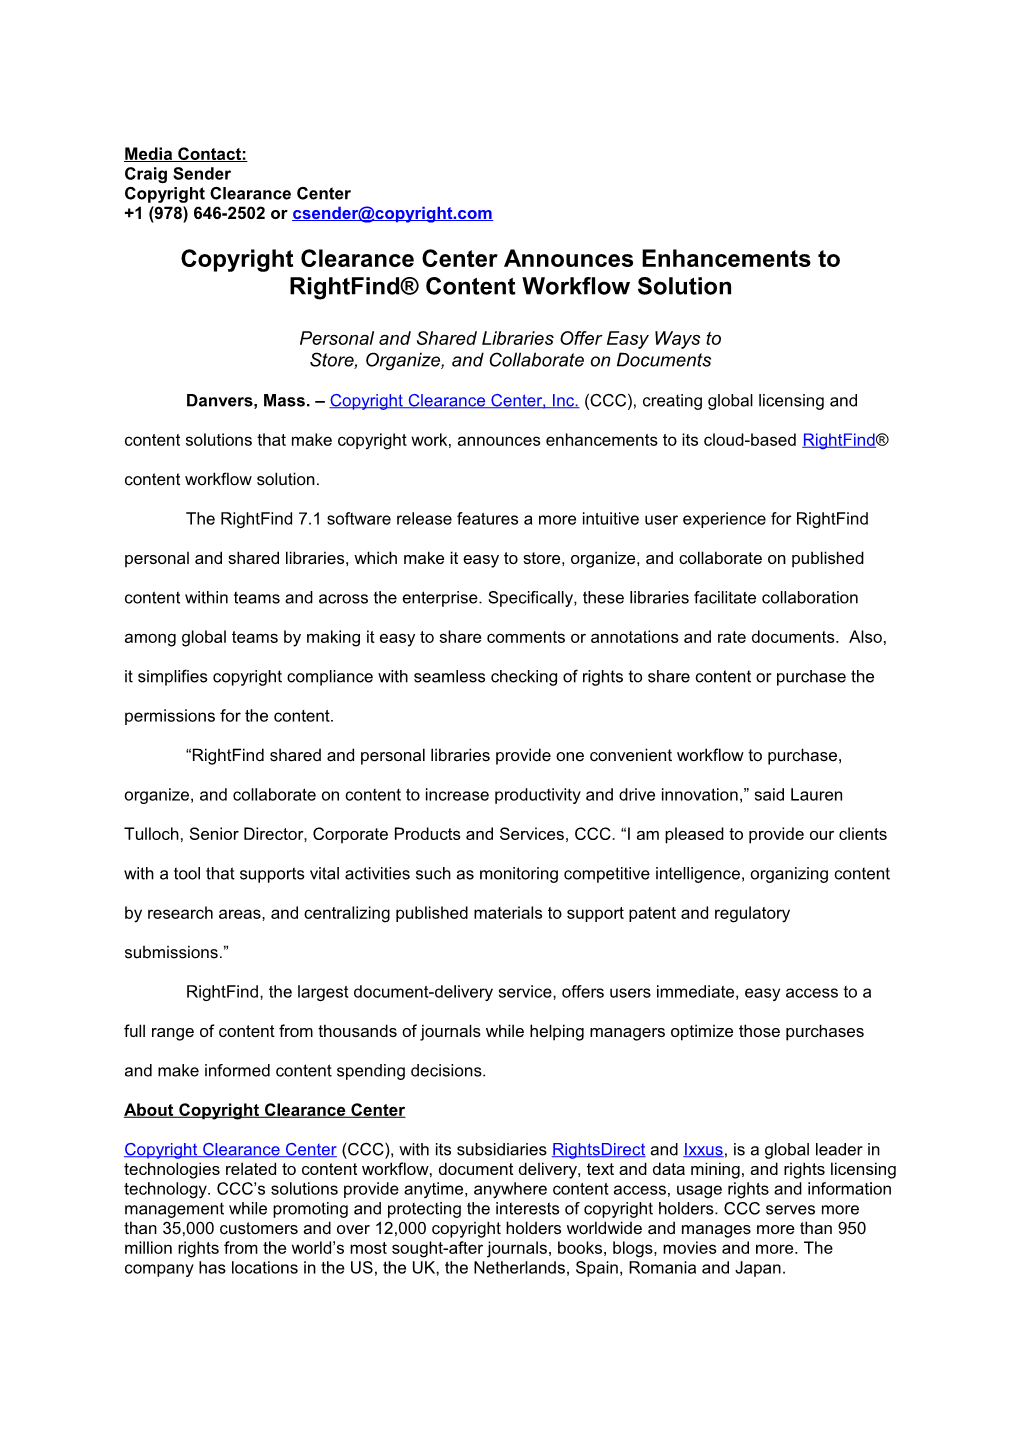 Copyright Clearance Center Announces Enhancements to Rightfind Content Workflow Solution